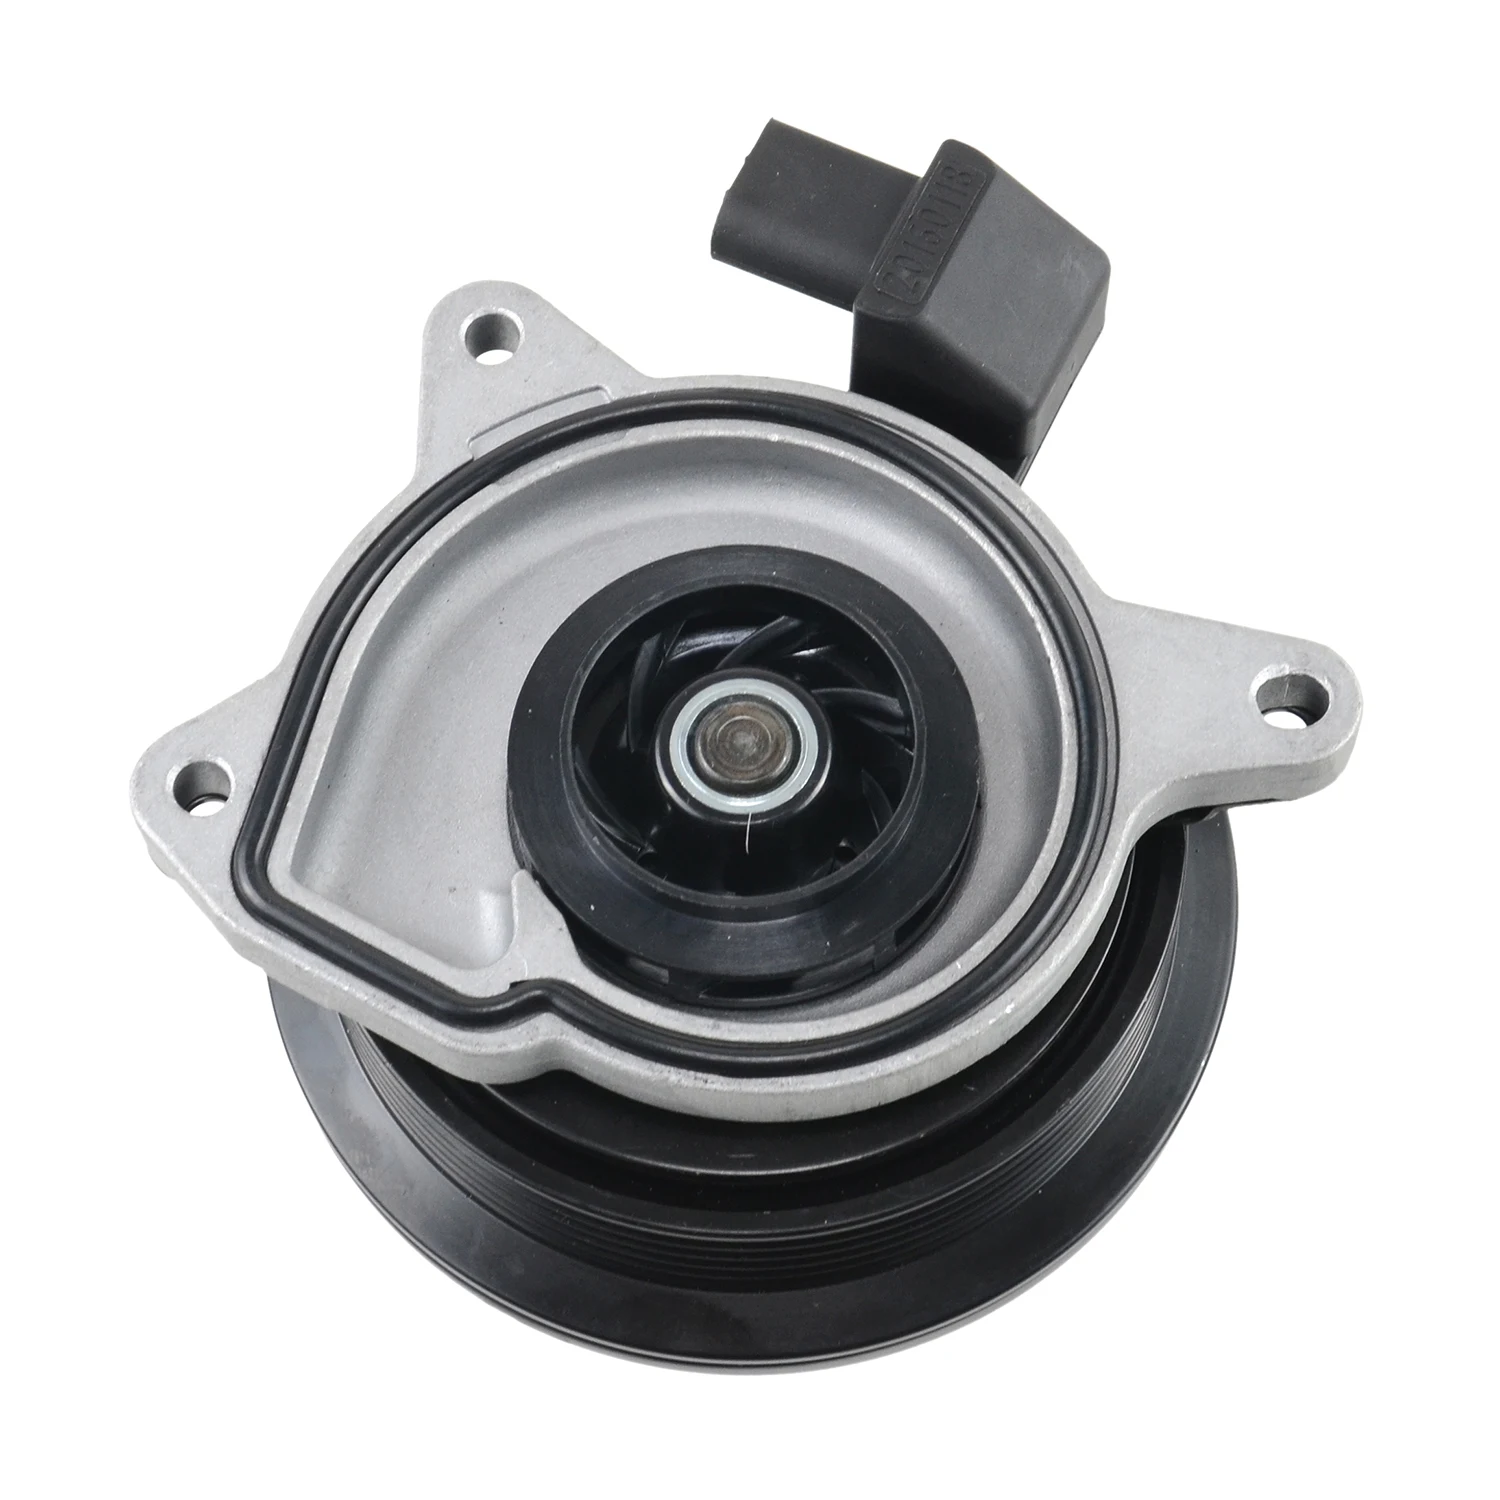 

AP01 Water Pump Assembly For VW Audi Seat Skoda Scirocco Golf Jetta Tiguan 1.4 TSI Dual Supercharged 03C880727D 03C121004J